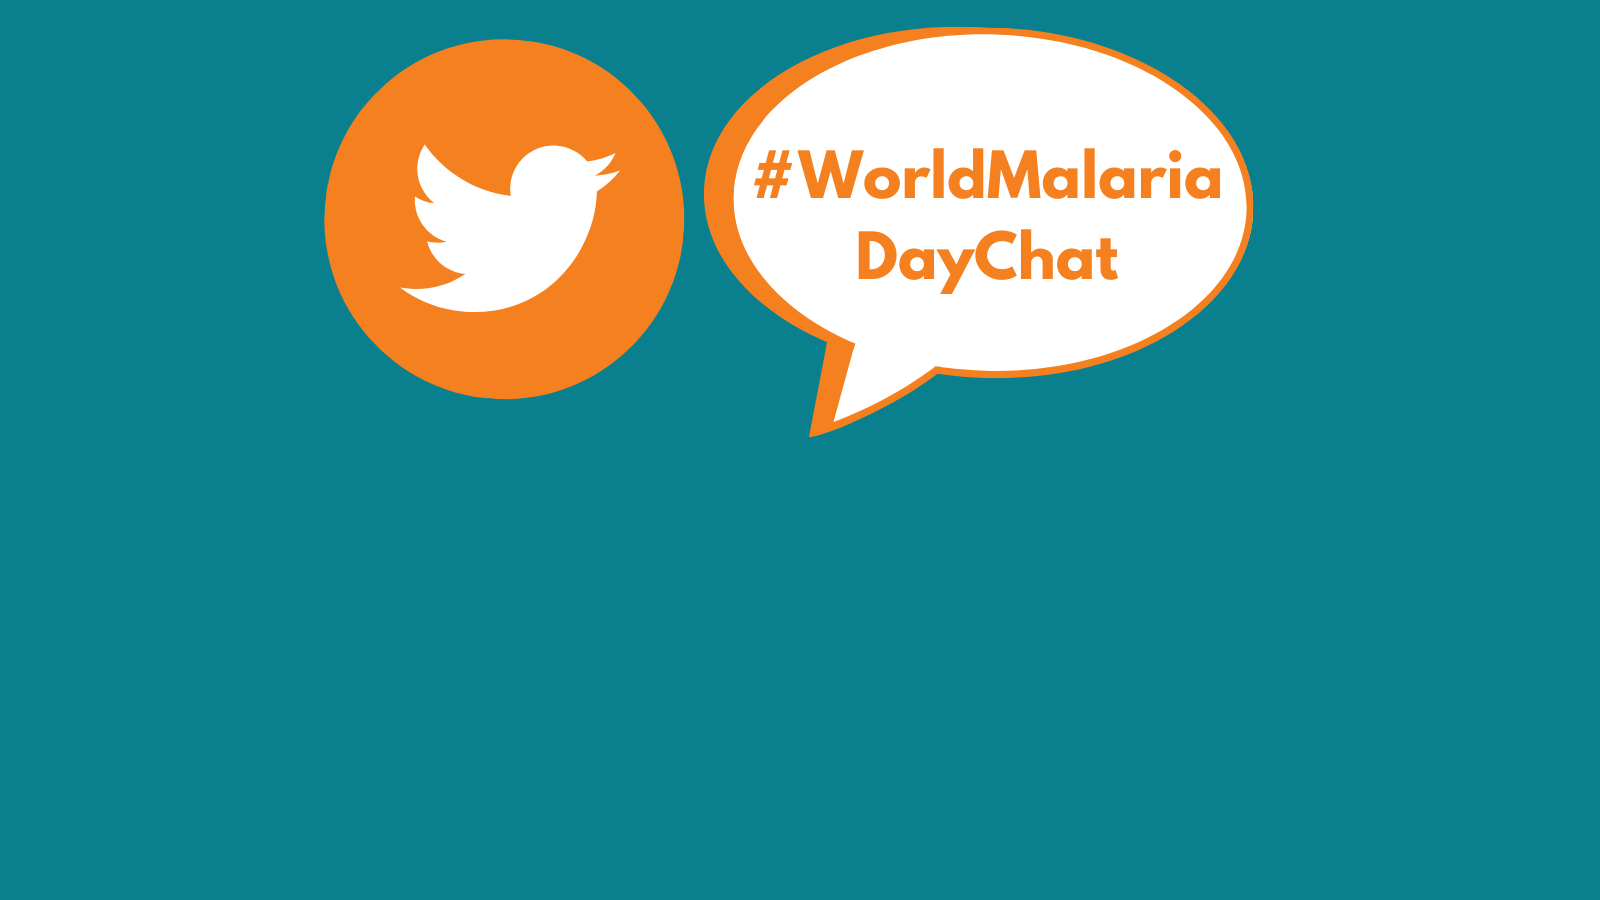 Twitter Chat Highlights: “Busting Myths About Malaria”